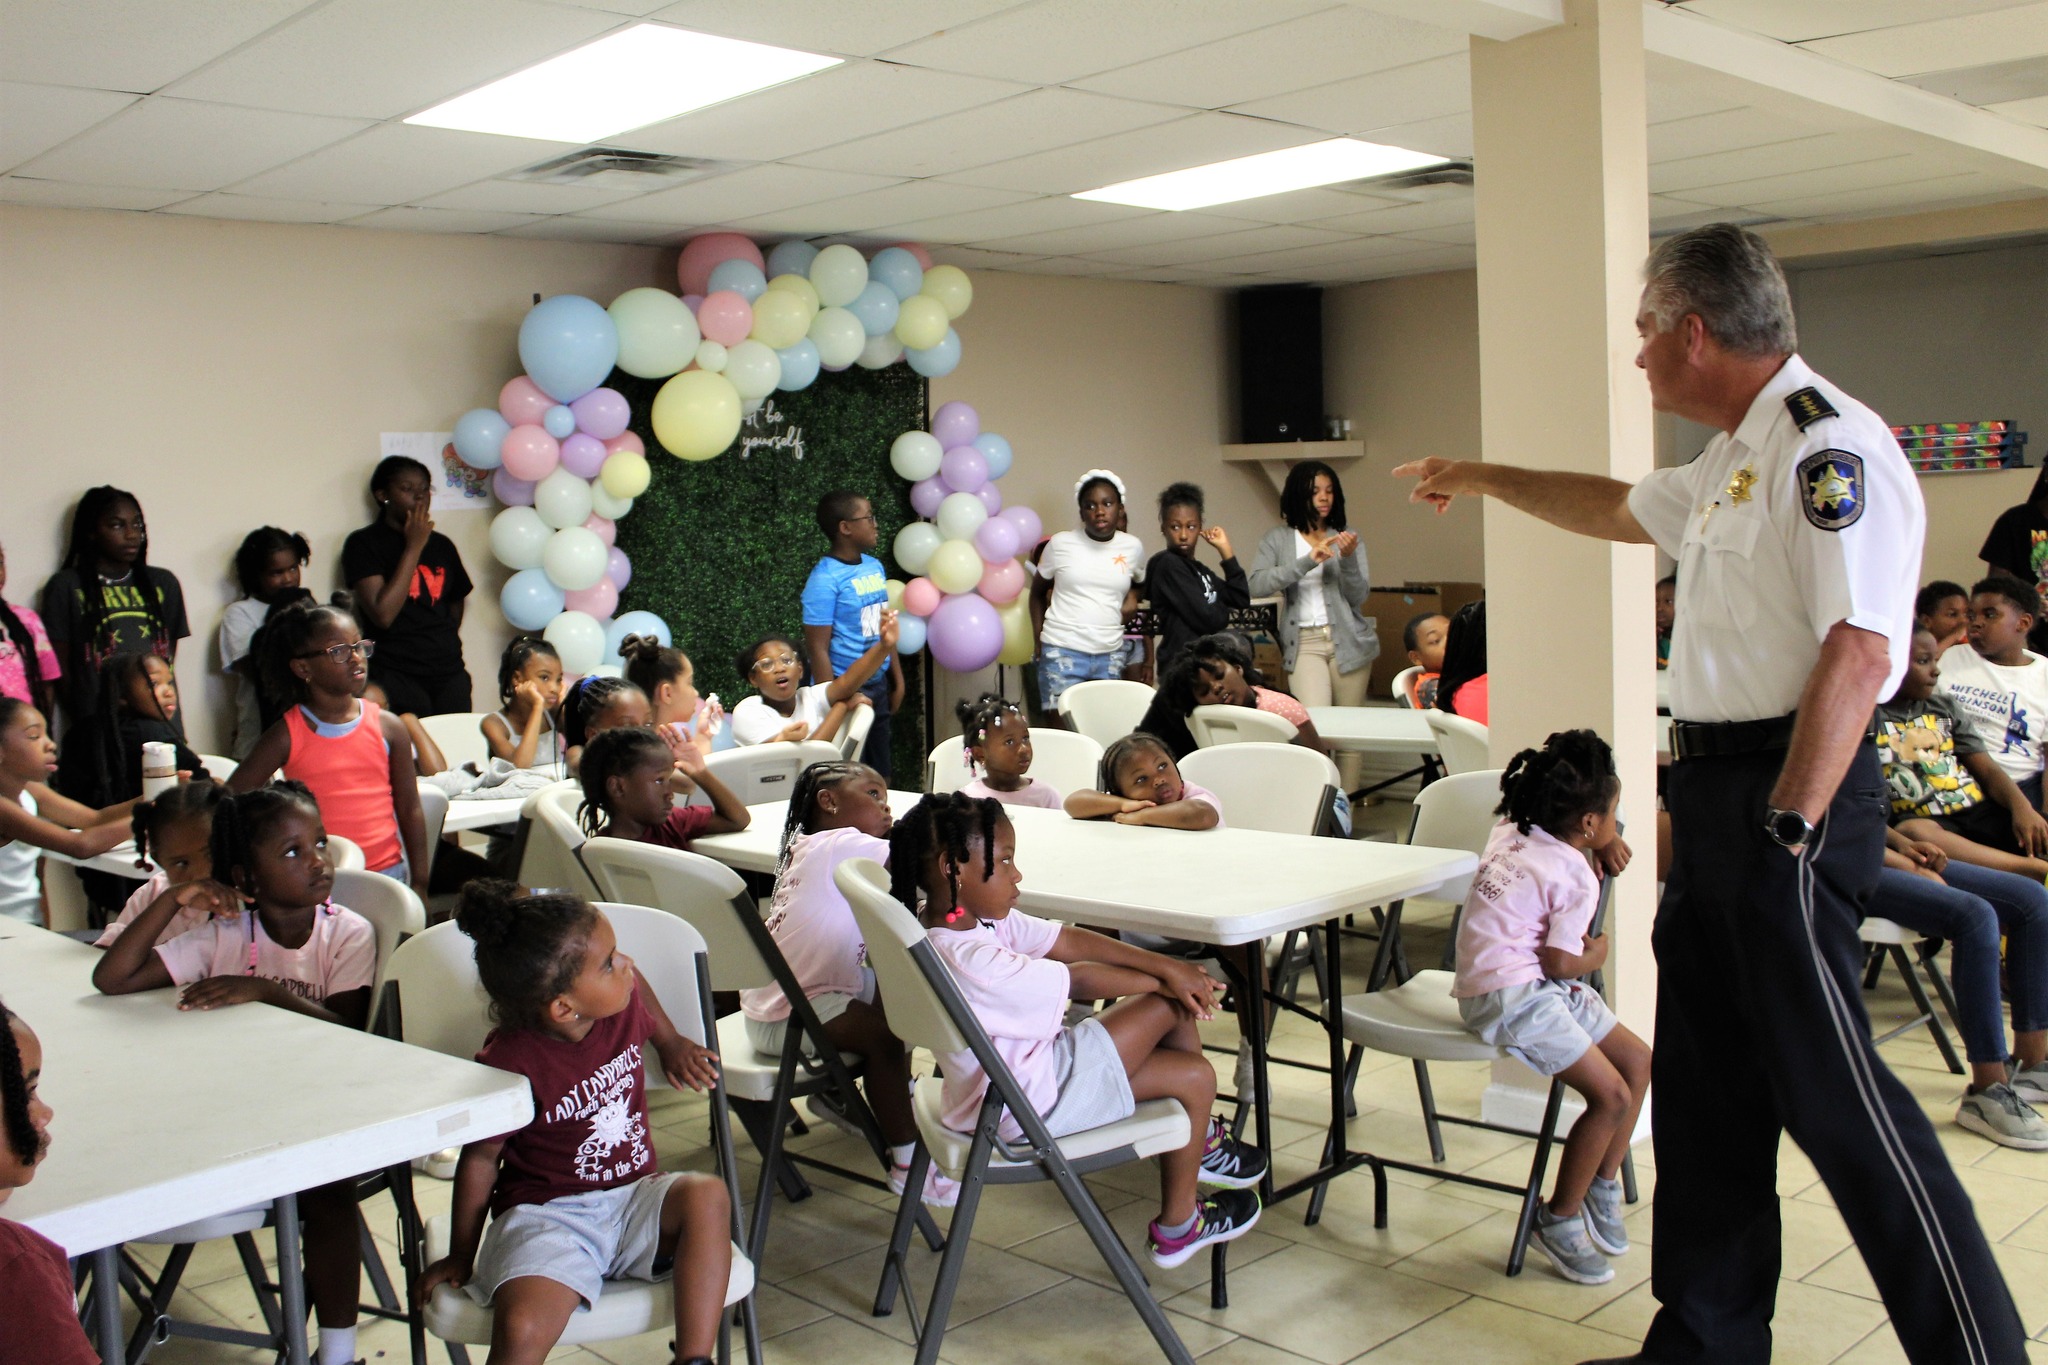 SBSO VISITS CHRISTIAN FELLOWSHIP SUMMER CAMP 

The St. Bernard Sheriff’s Office participated in Chr